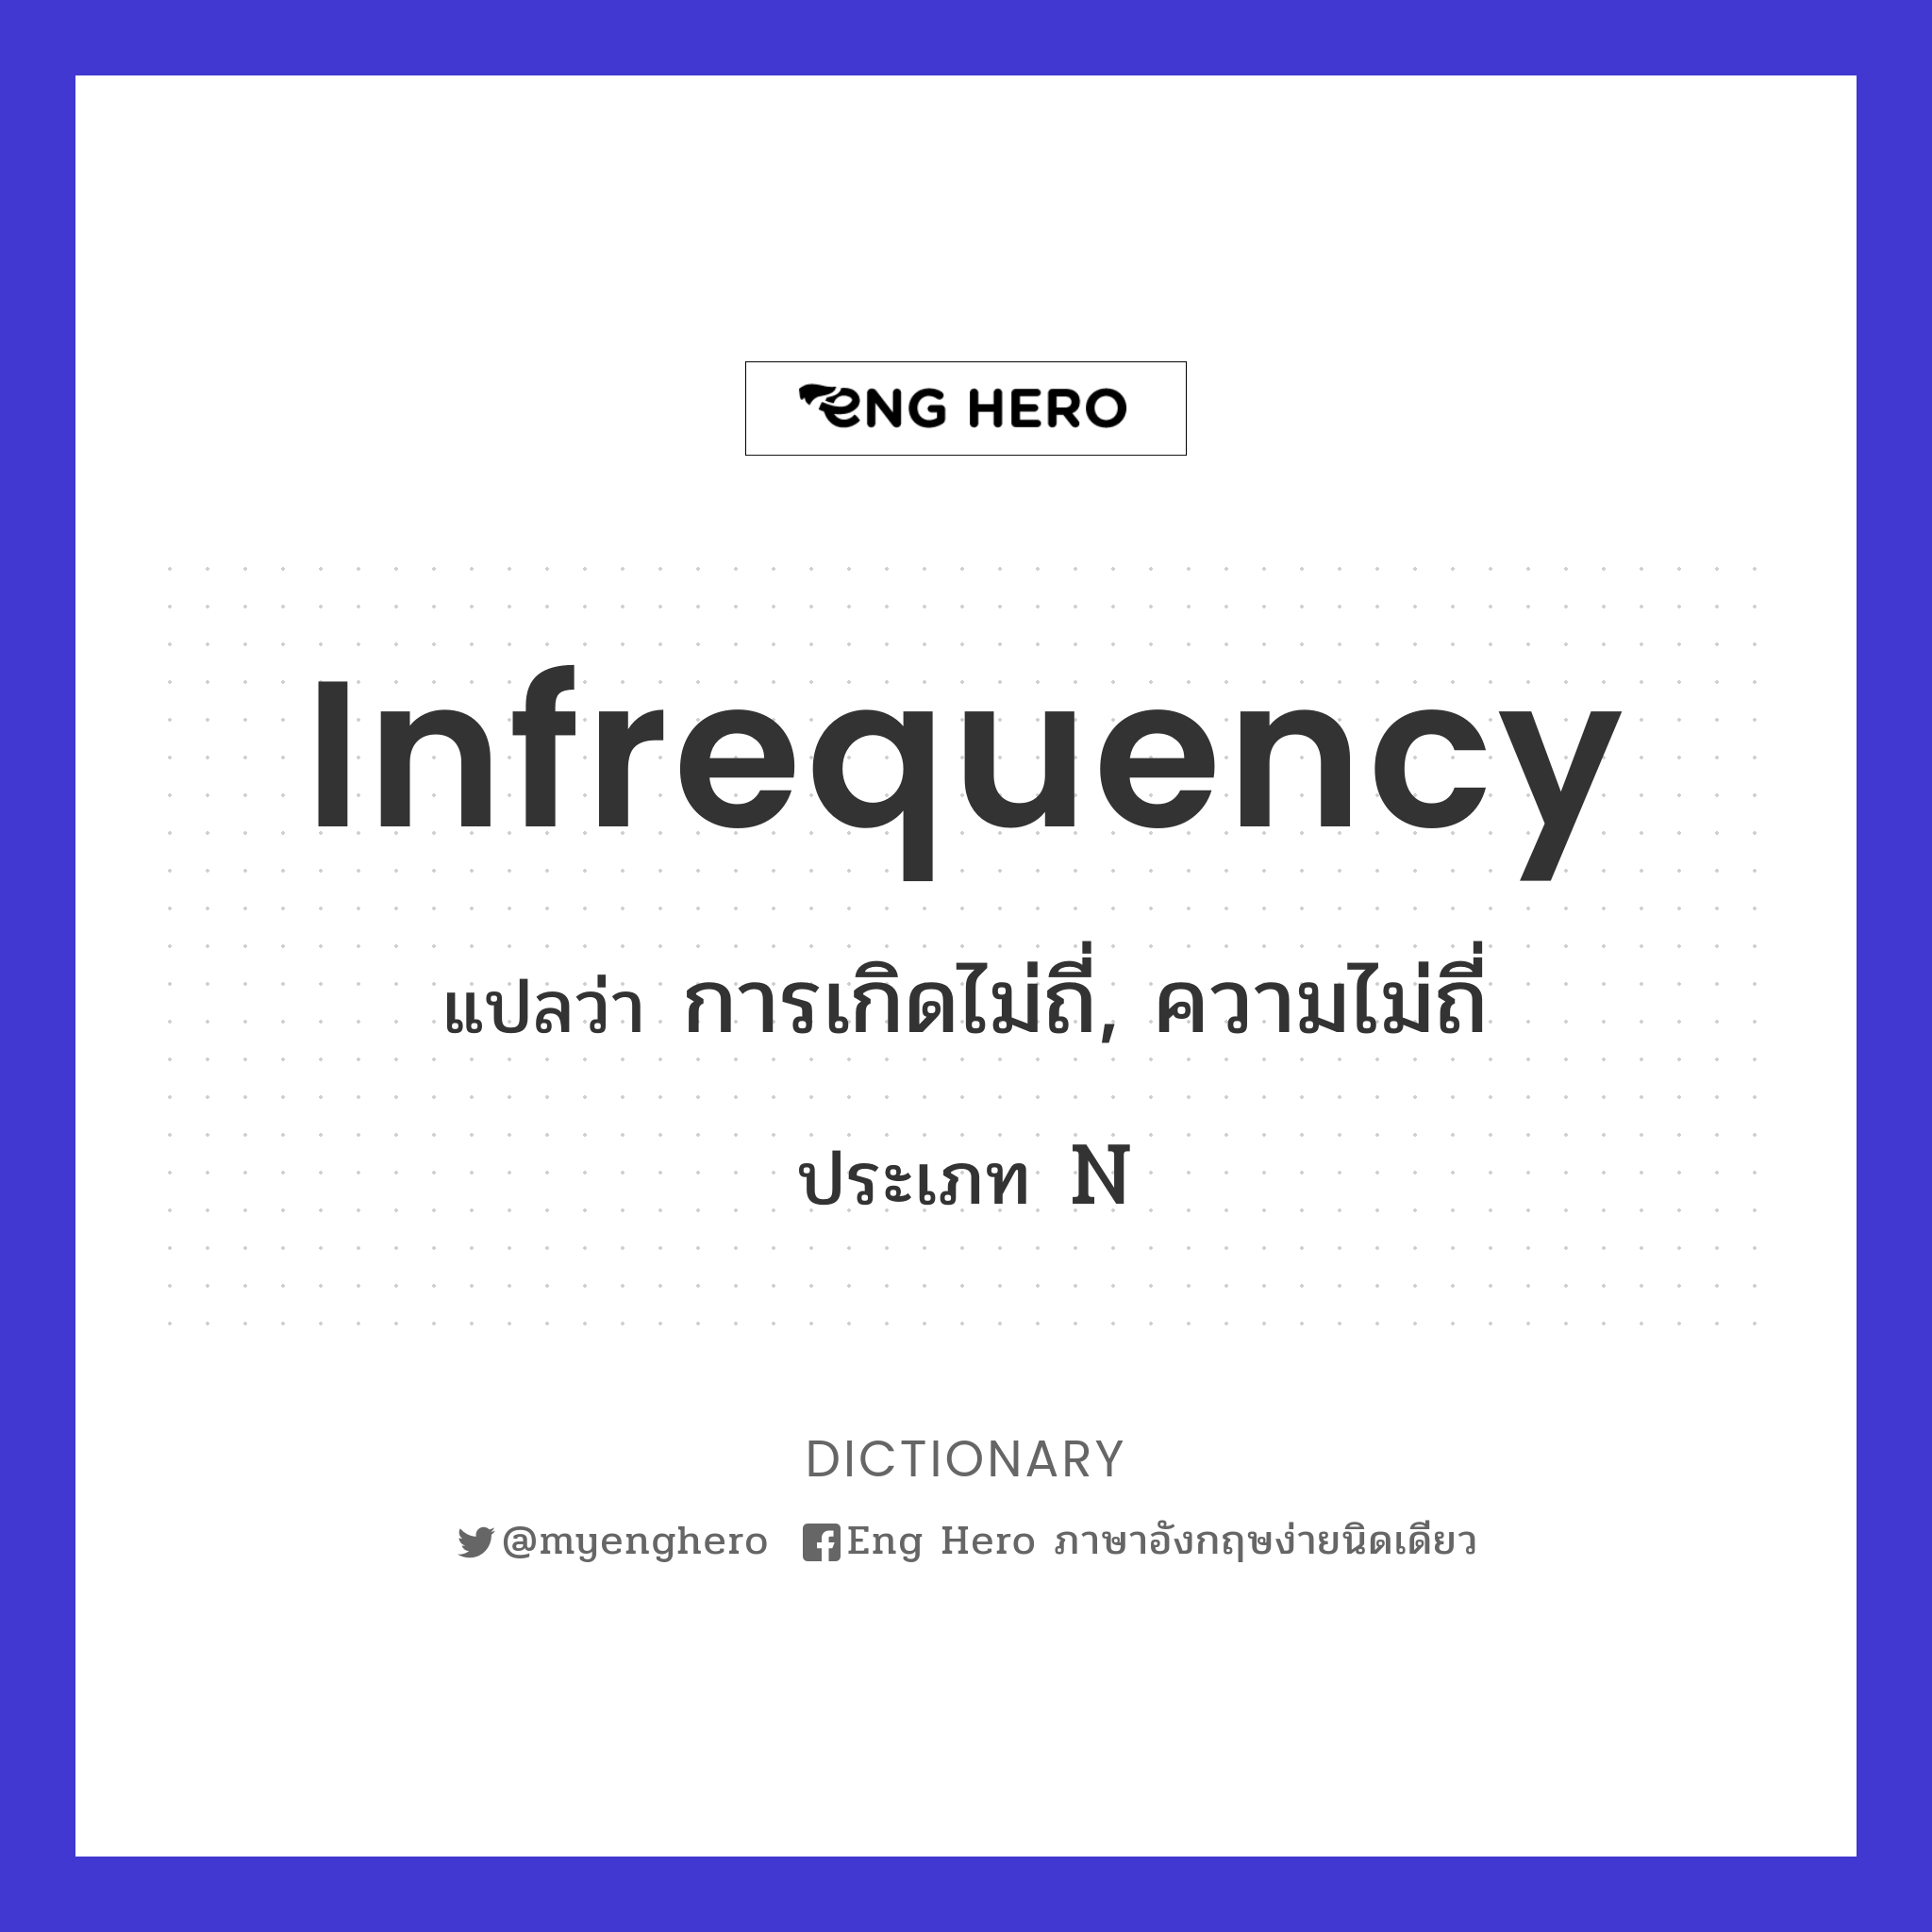 infrequency